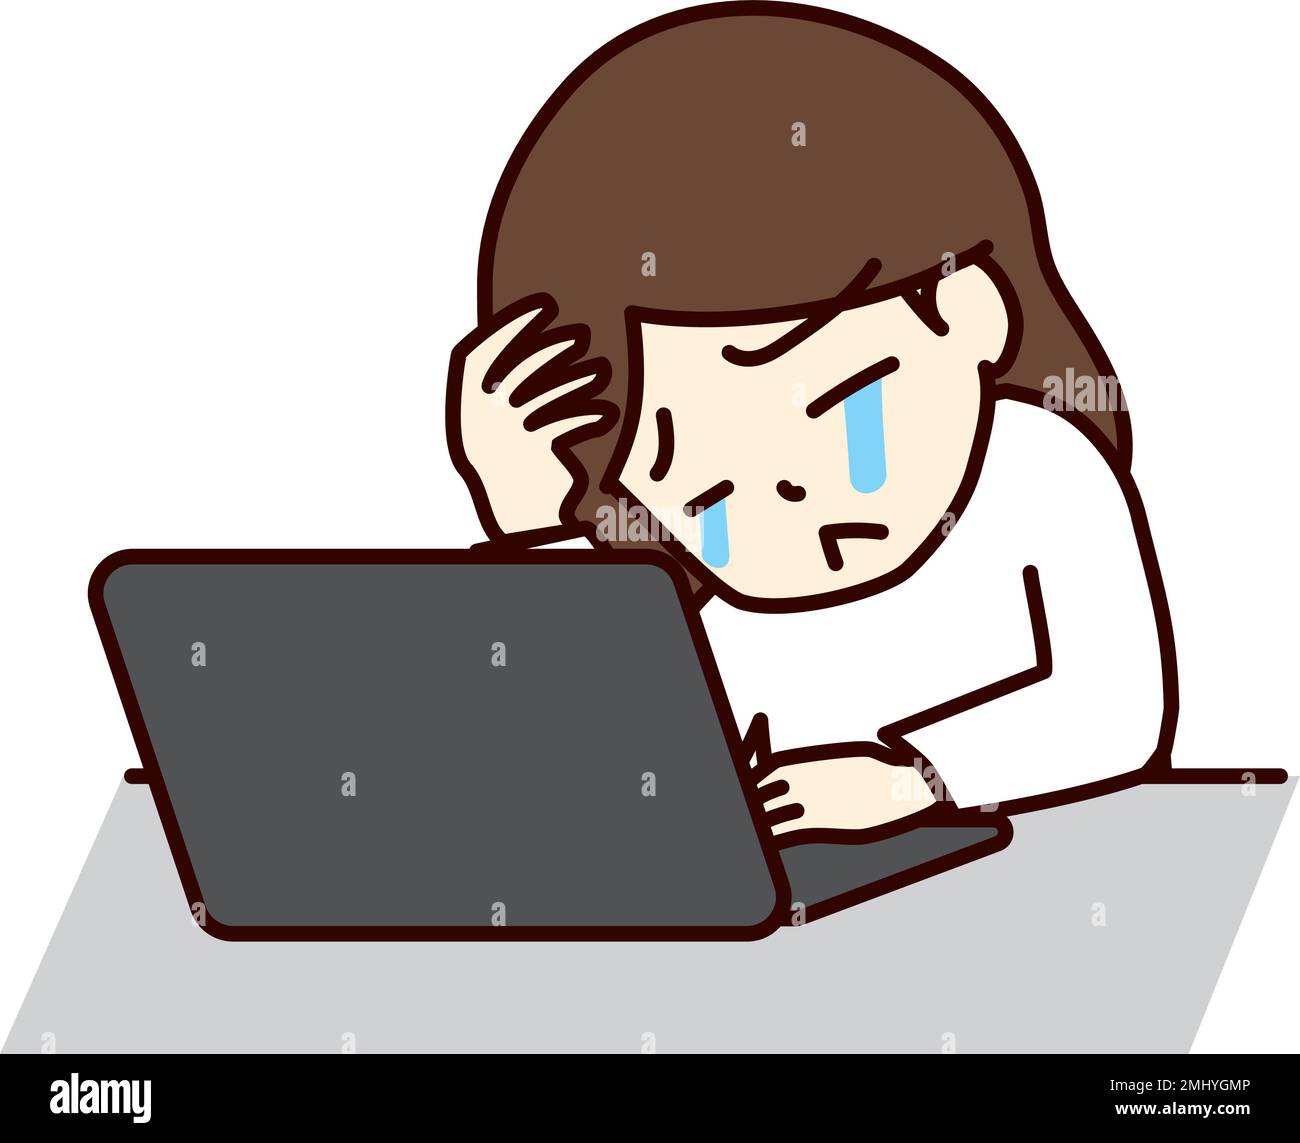 A woman exhausted in front of a laptop. Stock Vector